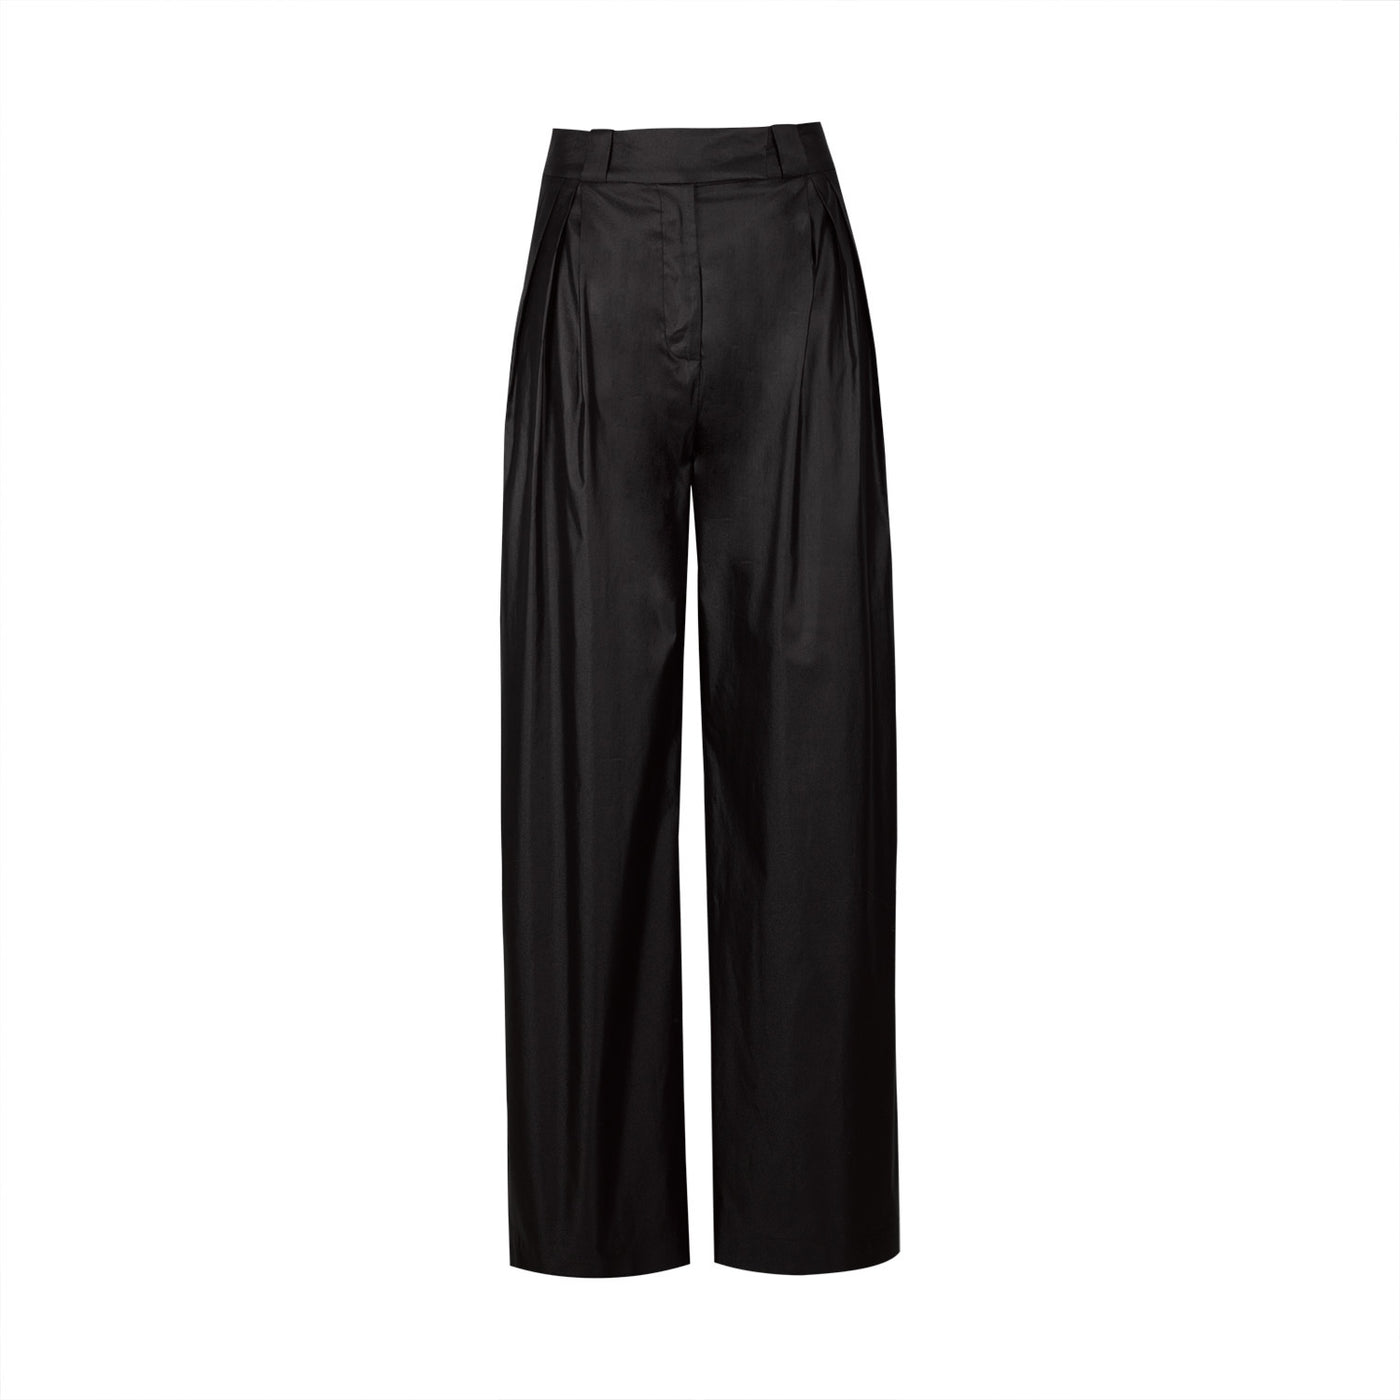 Black Pants with Pleat and Male